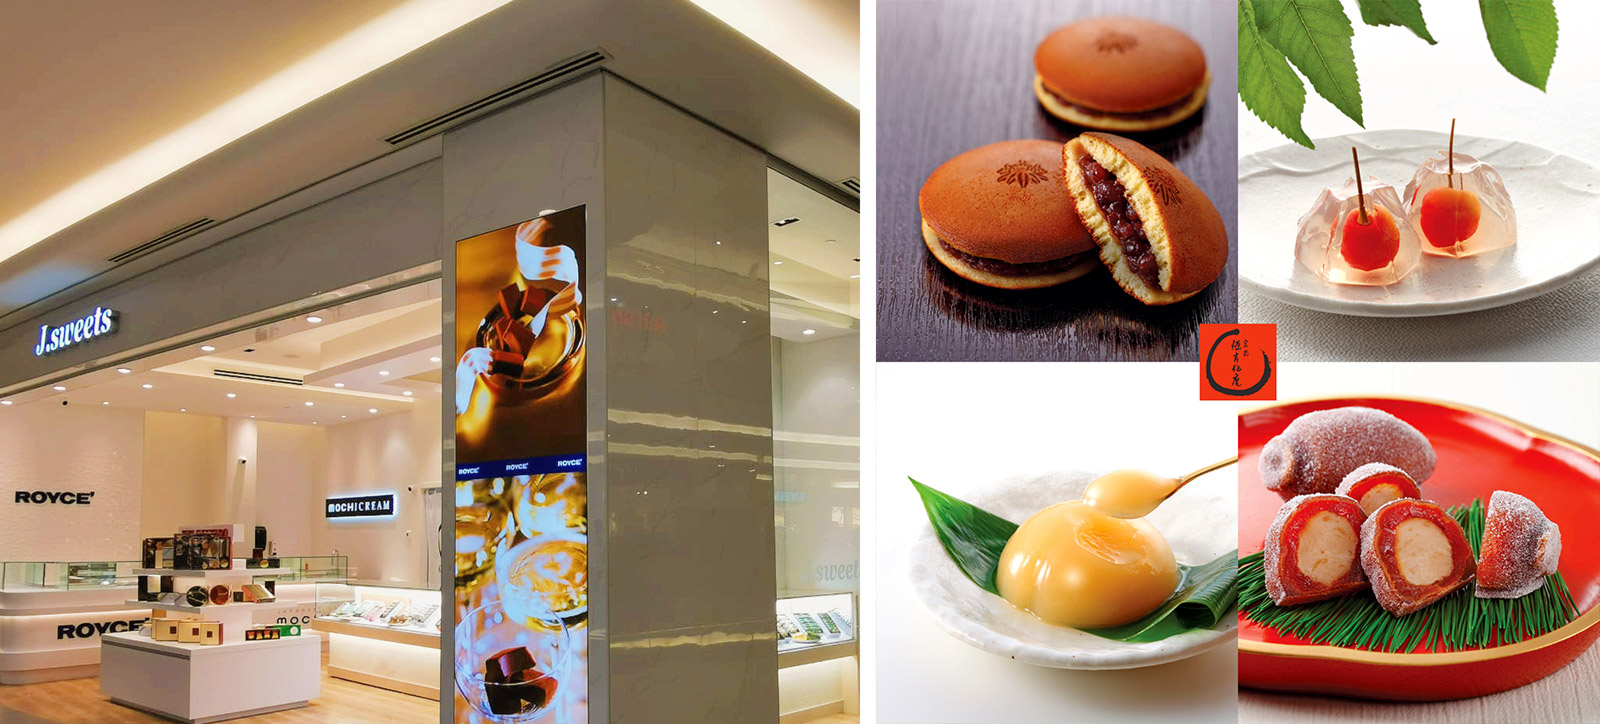 the partnership with Japan Airlines (JAL), which saw the opening of J.Sweets, an elegant dessert chain bringing top Japanese confectionery brands to North America